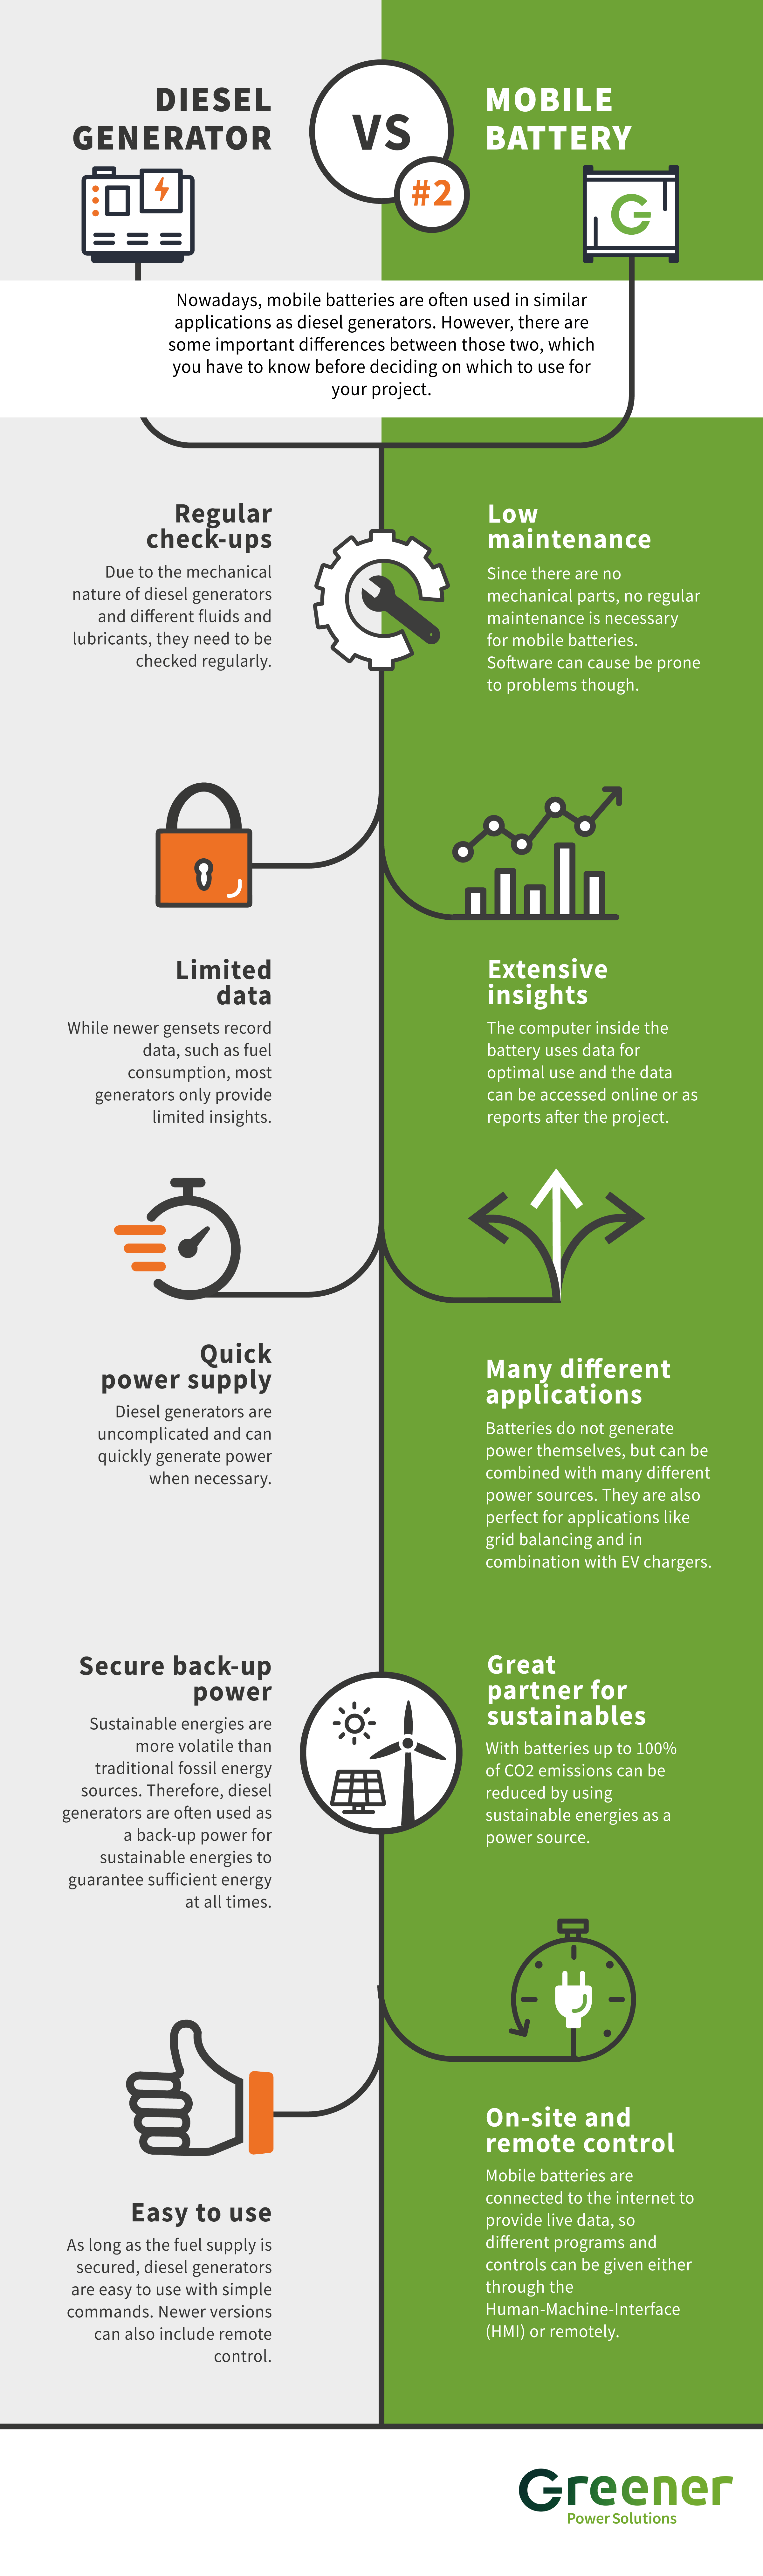 Infographic showing five more differences between diesel generators and mobile batteries